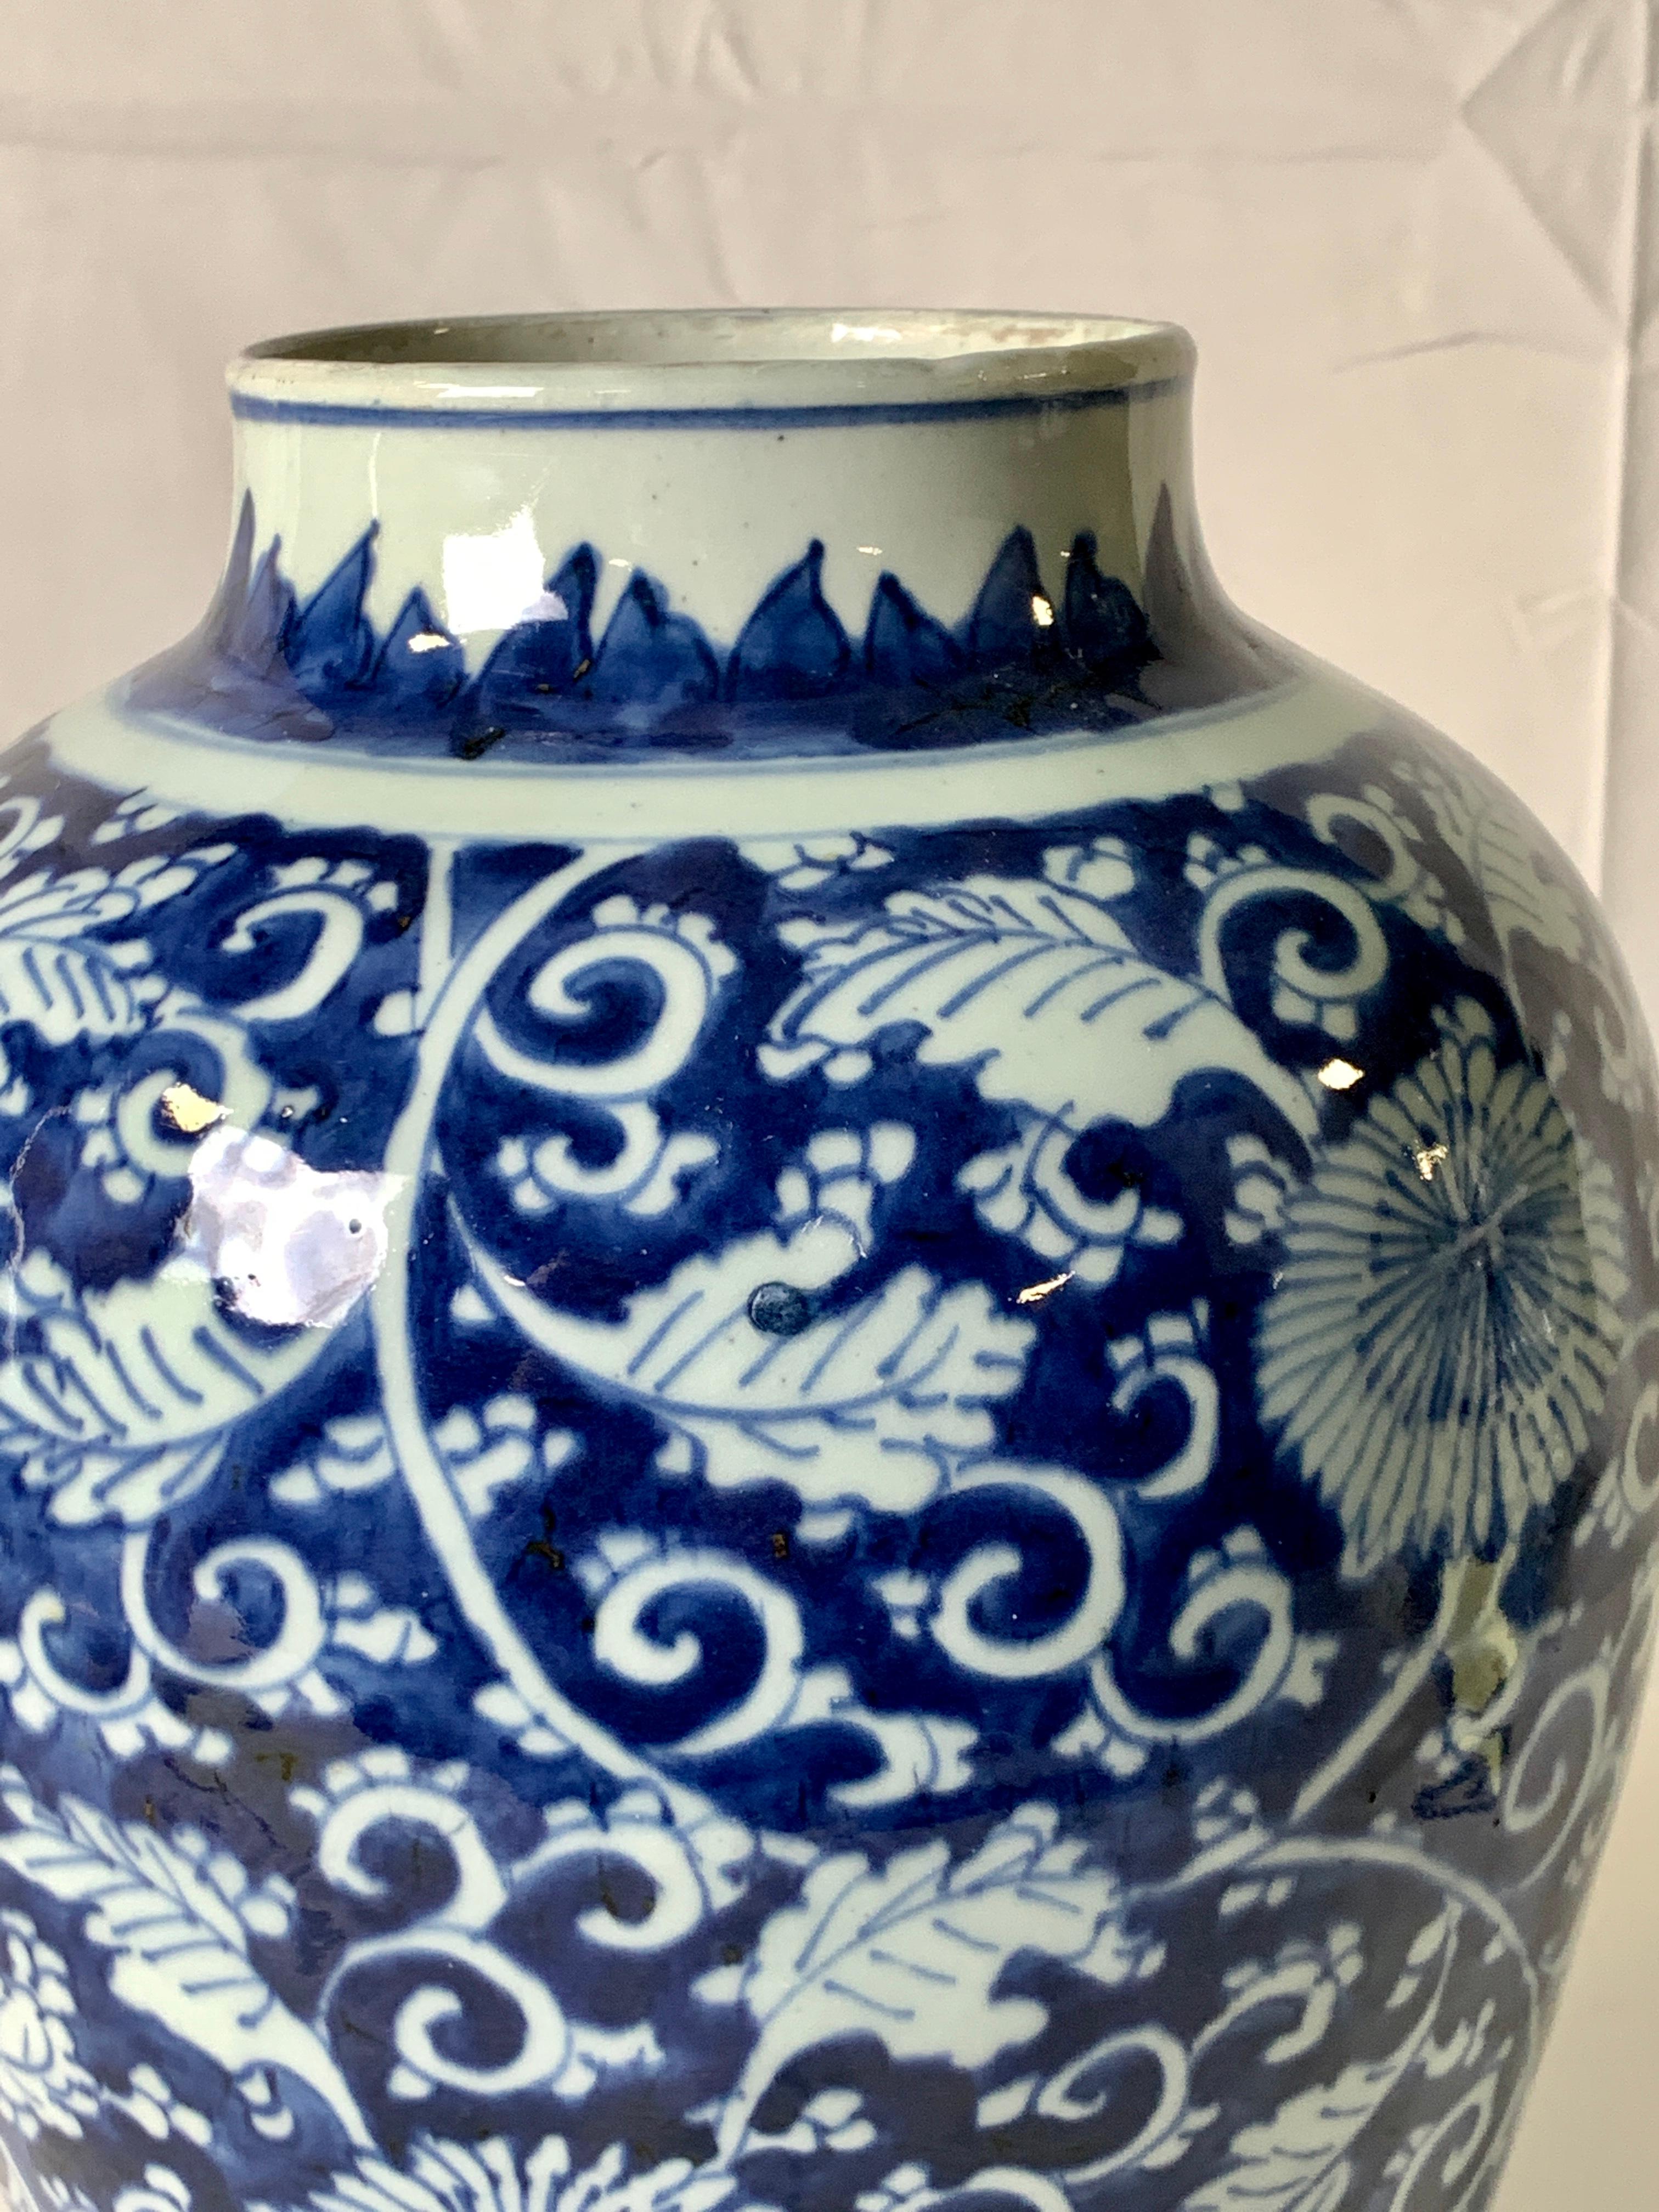 Blue and White Chinese Porcelain Vase Made in the Kangxi Era 1